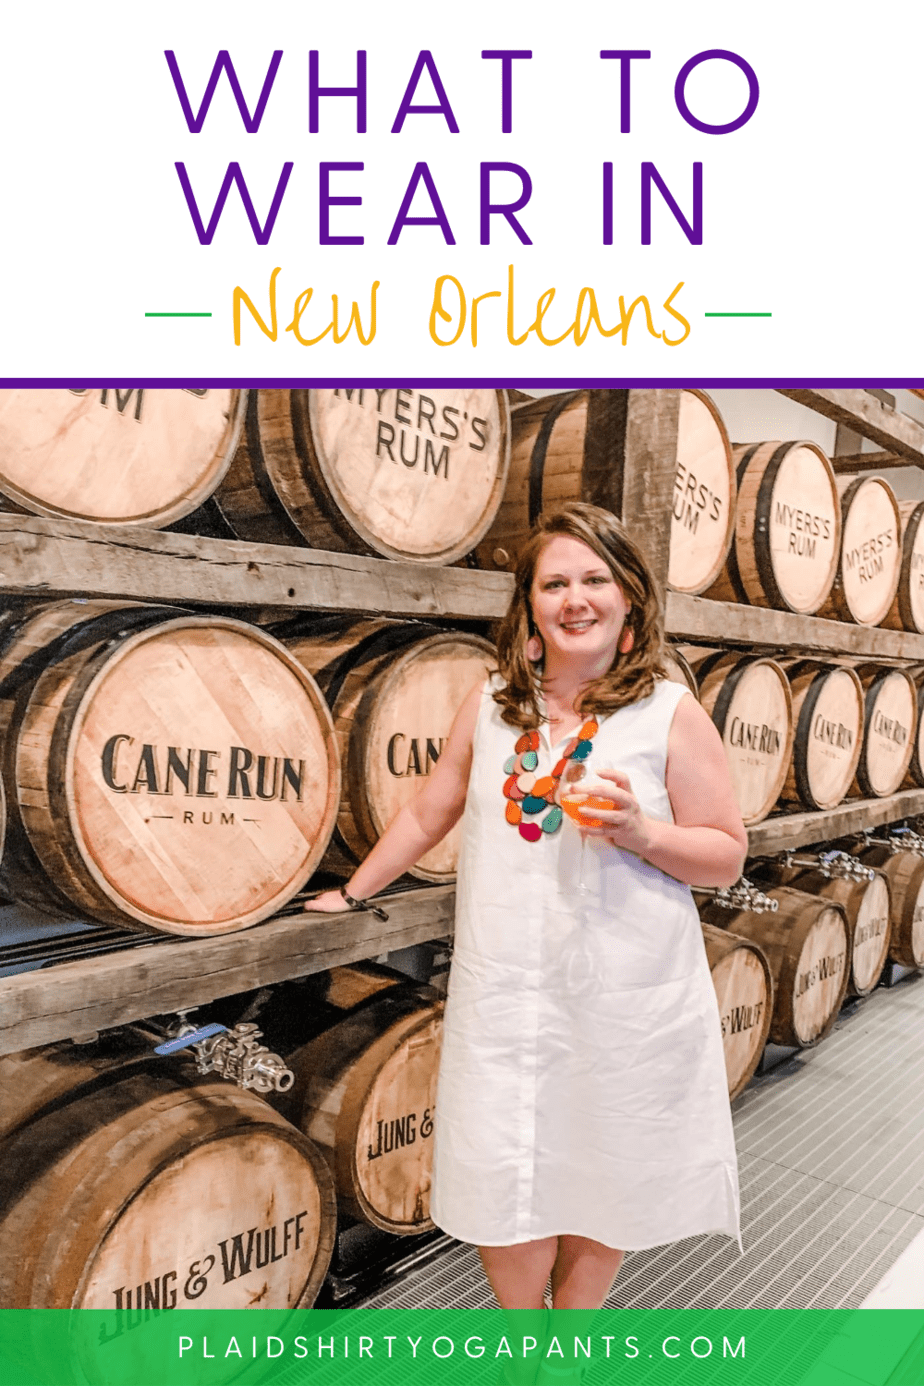 What to wear in New Orleans for any Occasion